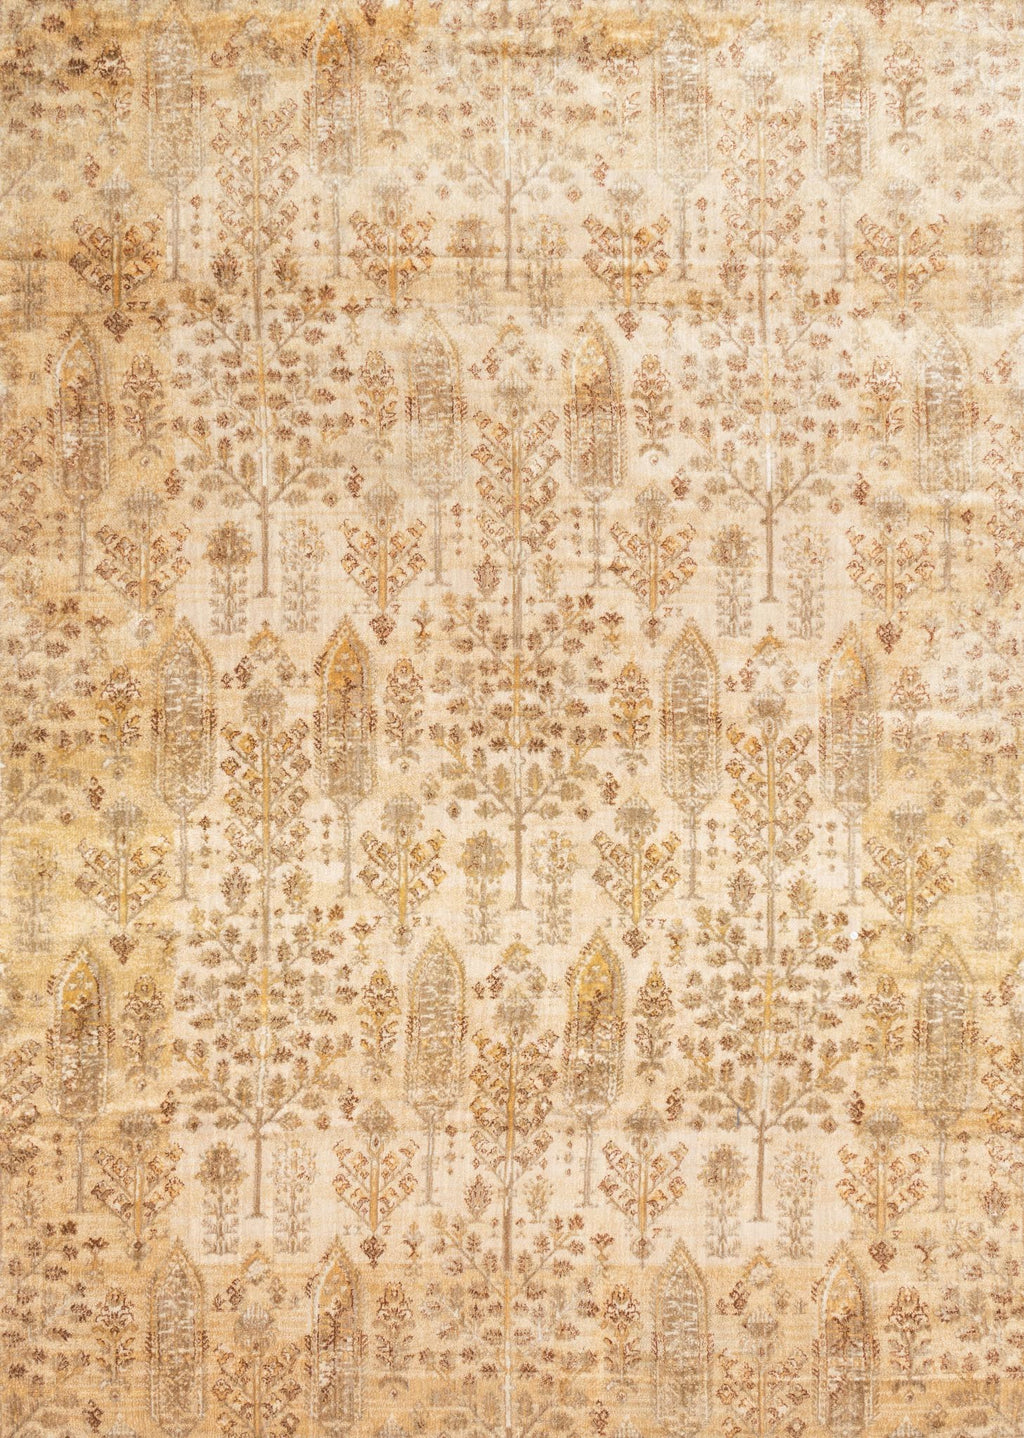 ANASTASIA Collection Rug  in  ANT IVORY / GOLD Beige Runner Power-Loomed Polypropylene/Polyester